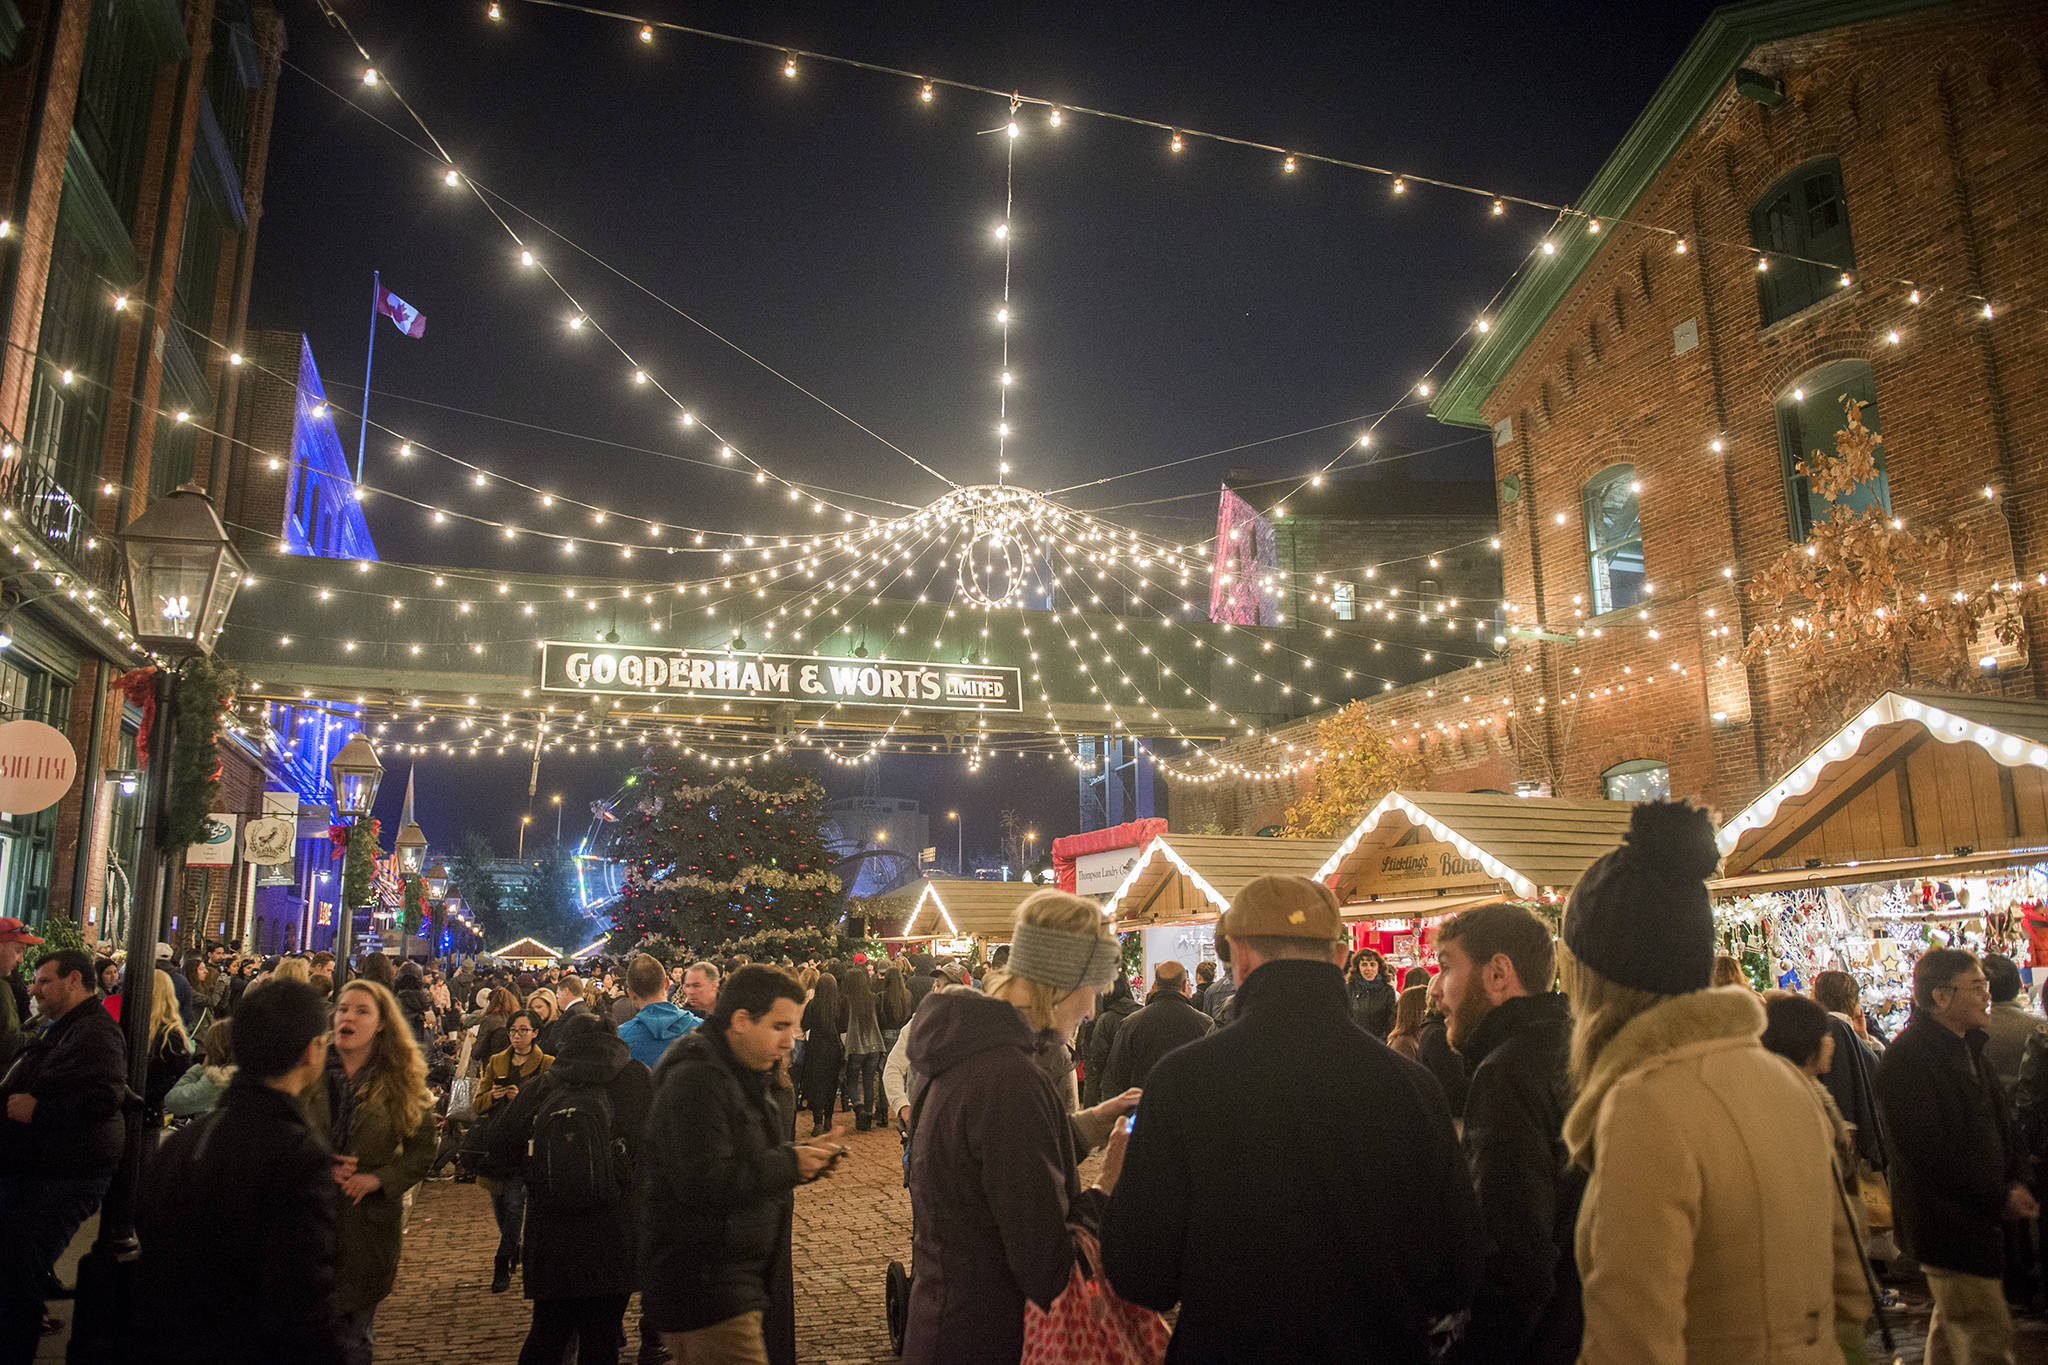 The Toronto Christmas Market is coming back this winter